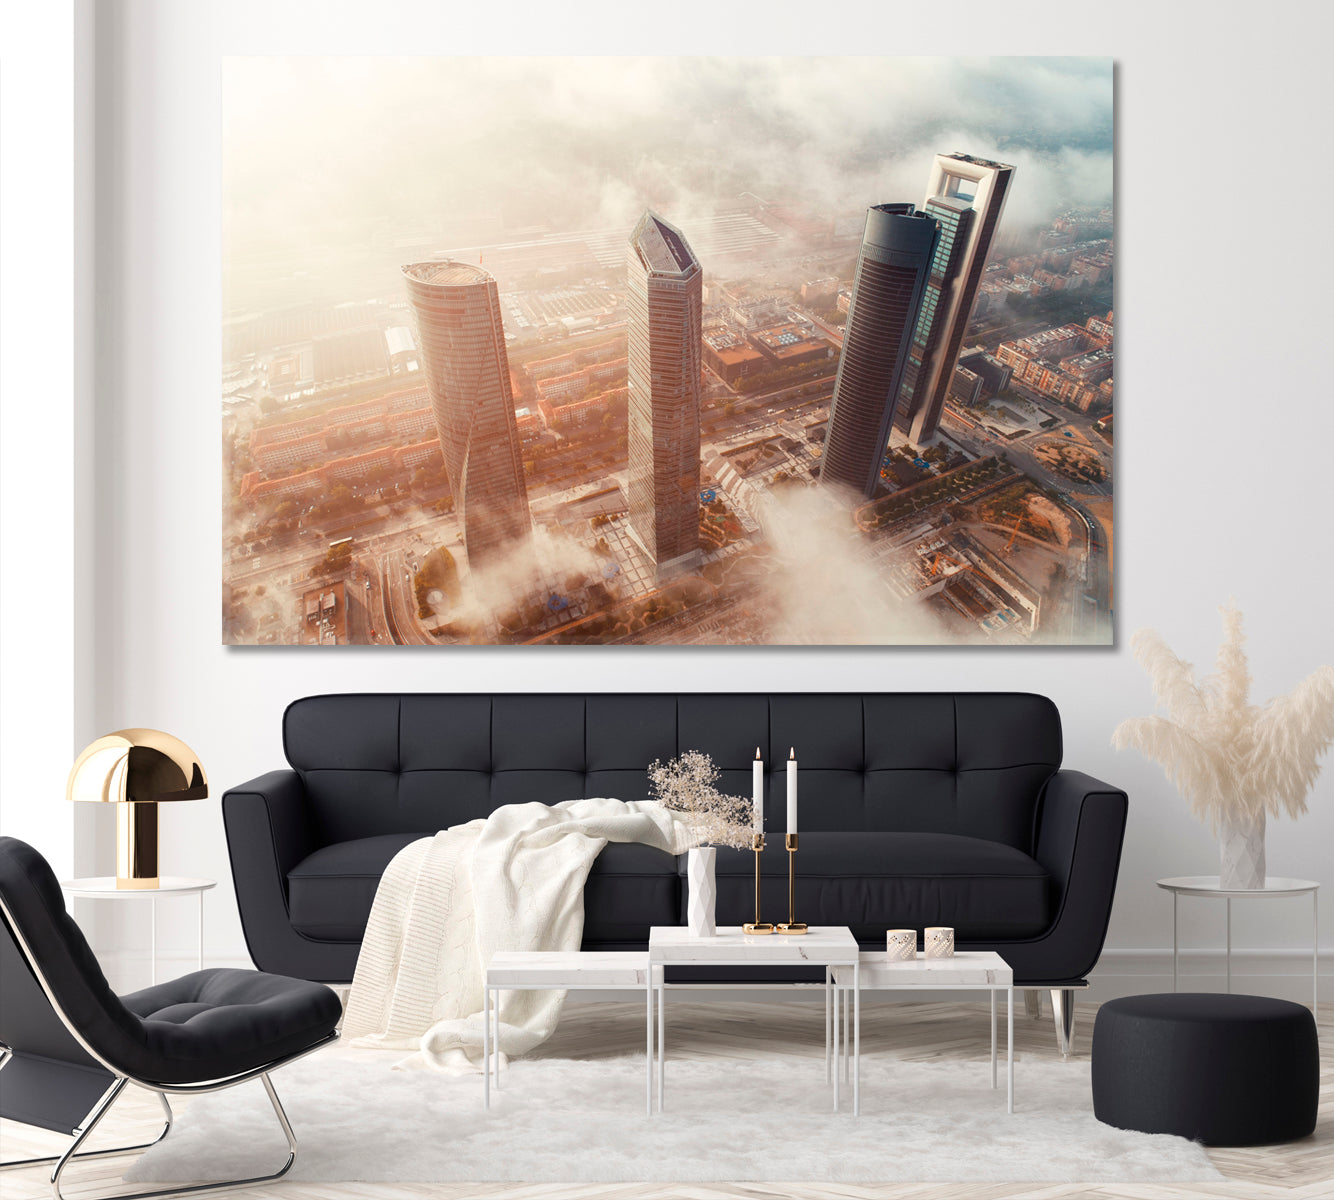 Madrid Financial Business District Spain Canvas Print ArtLexy 1 Panel 24"x16" inches 